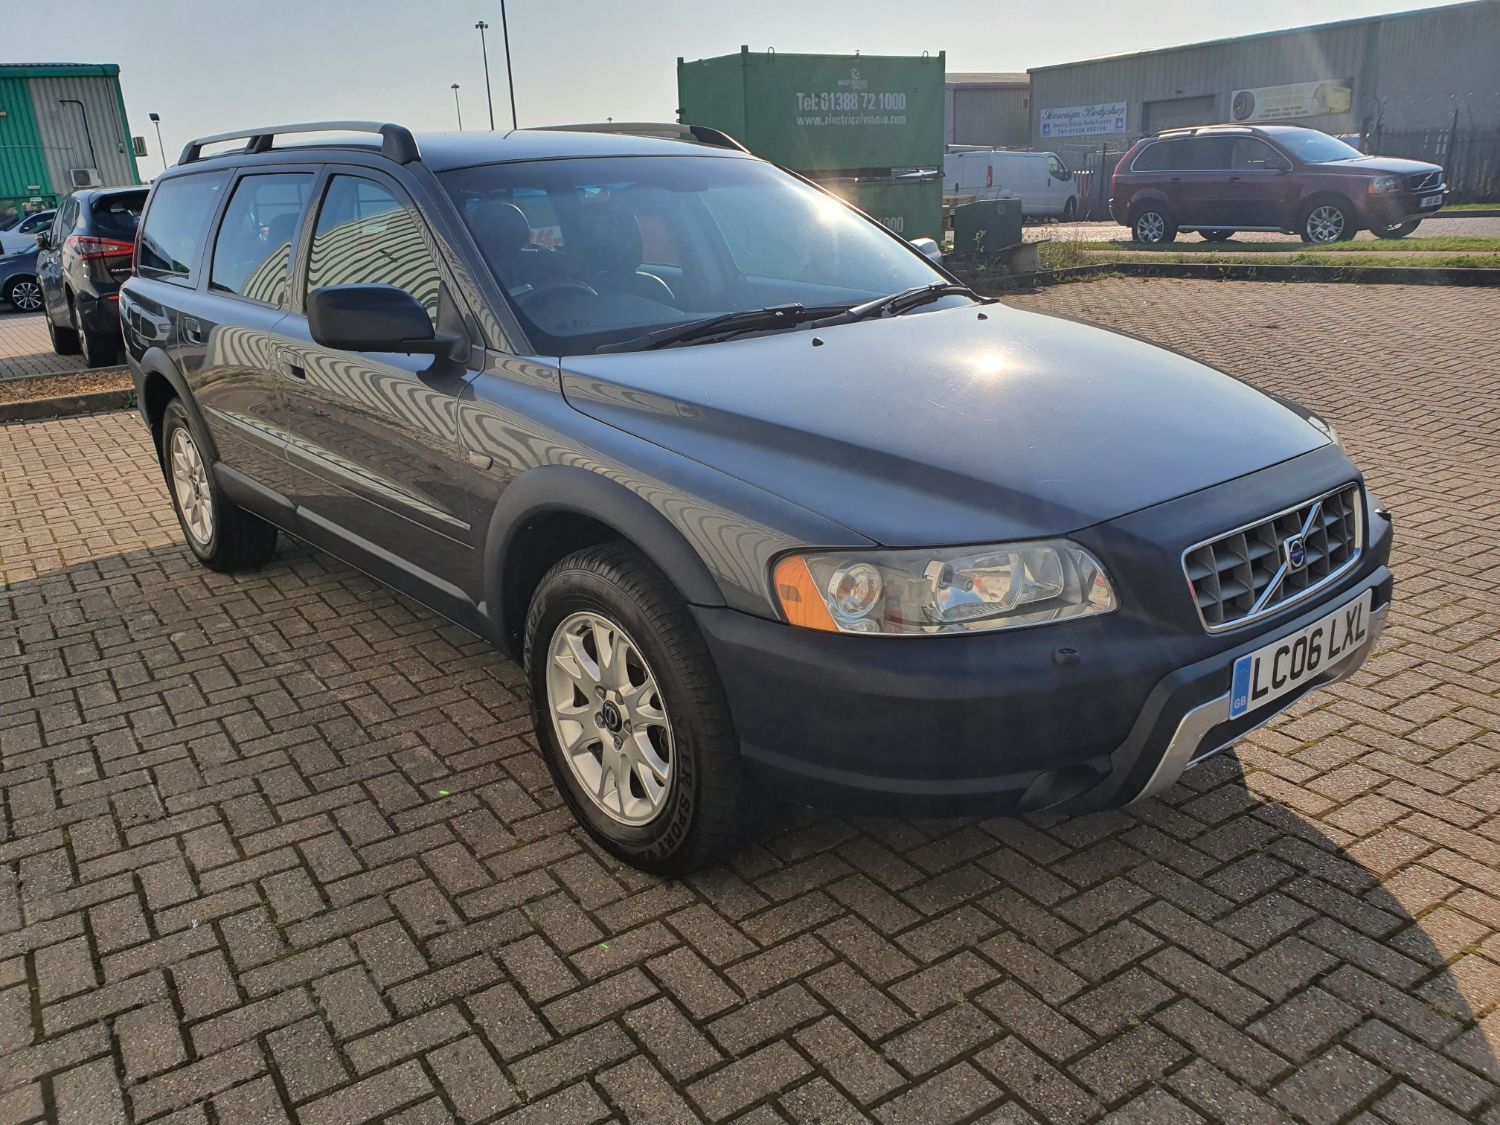 Used VOLVO XC70 in Corby, Northants | Oakley Car Sales